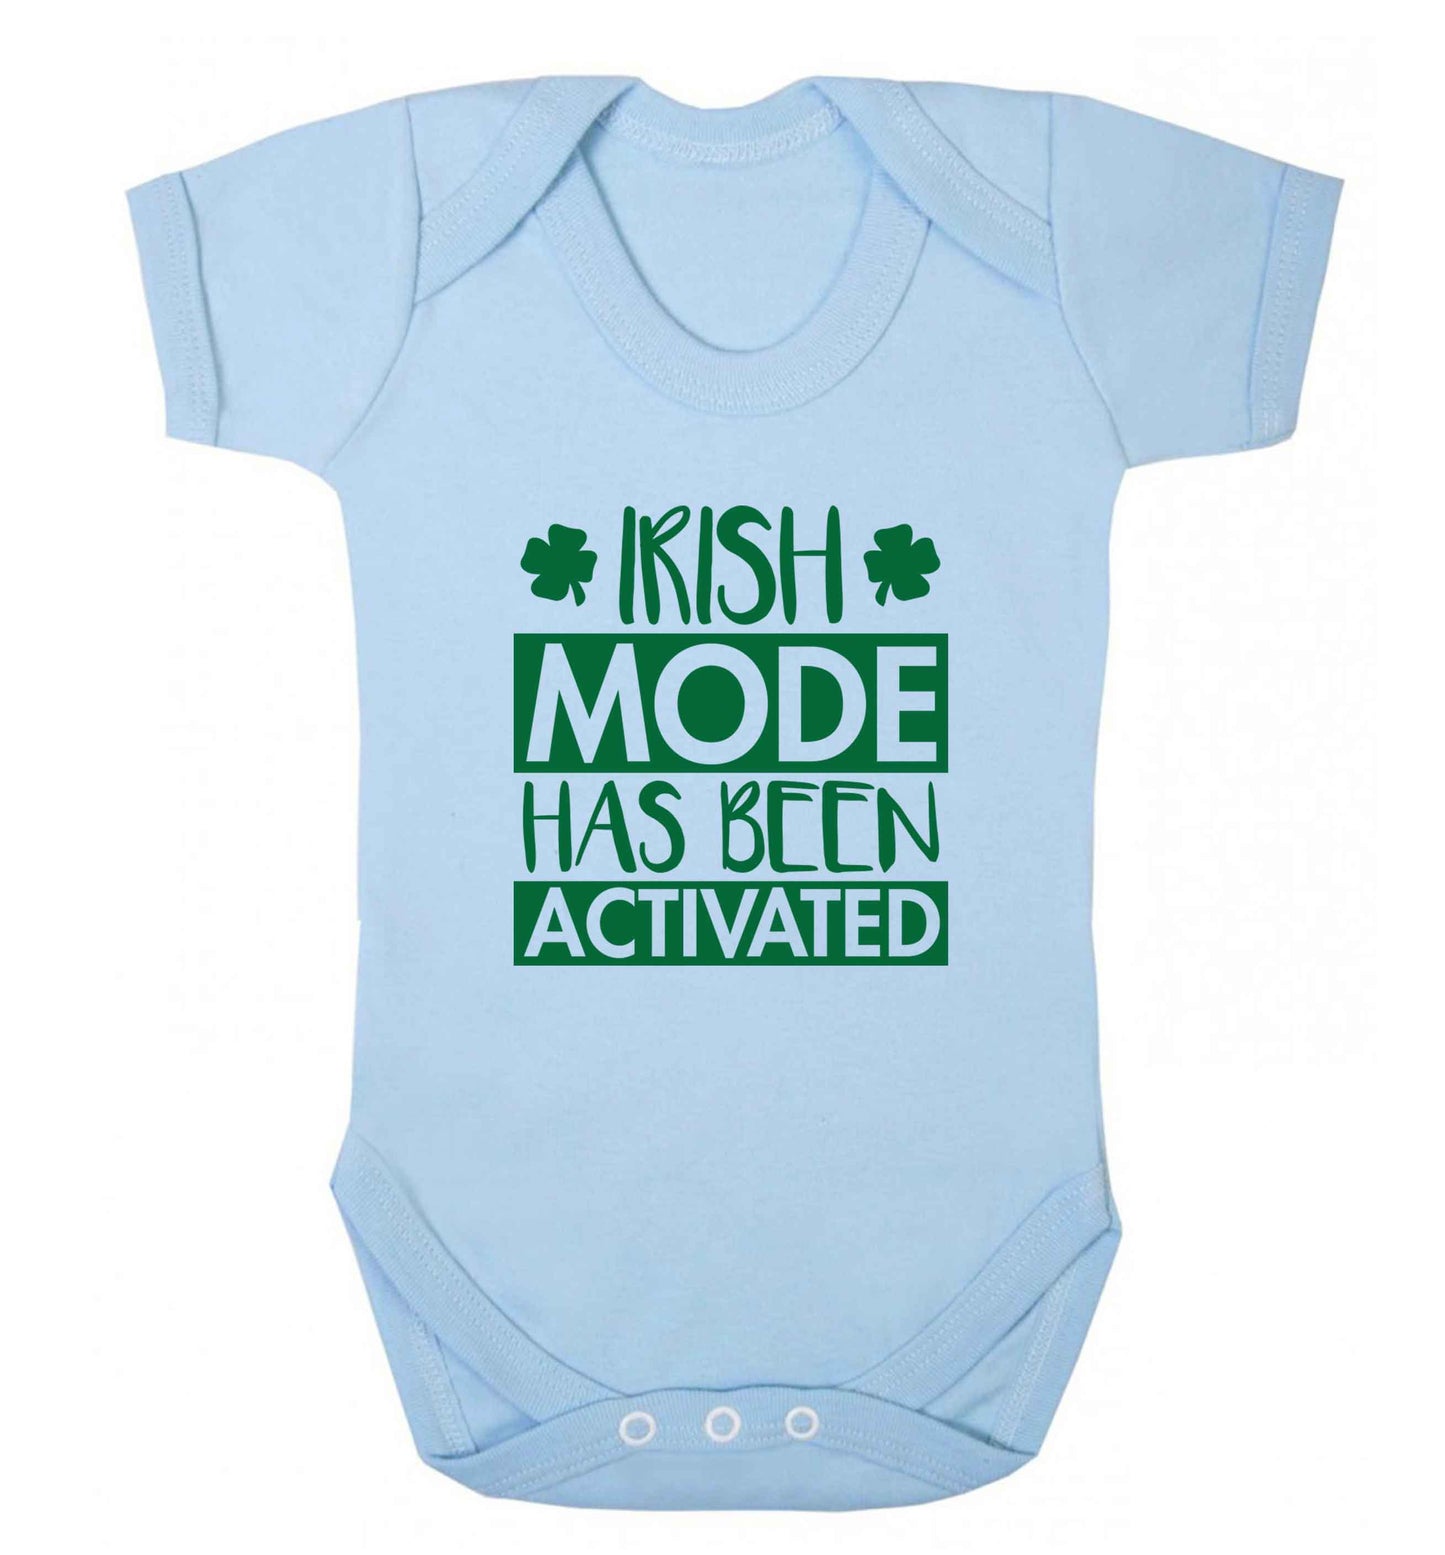 Irish mode has been activated baby vest pale blue 18-24 months